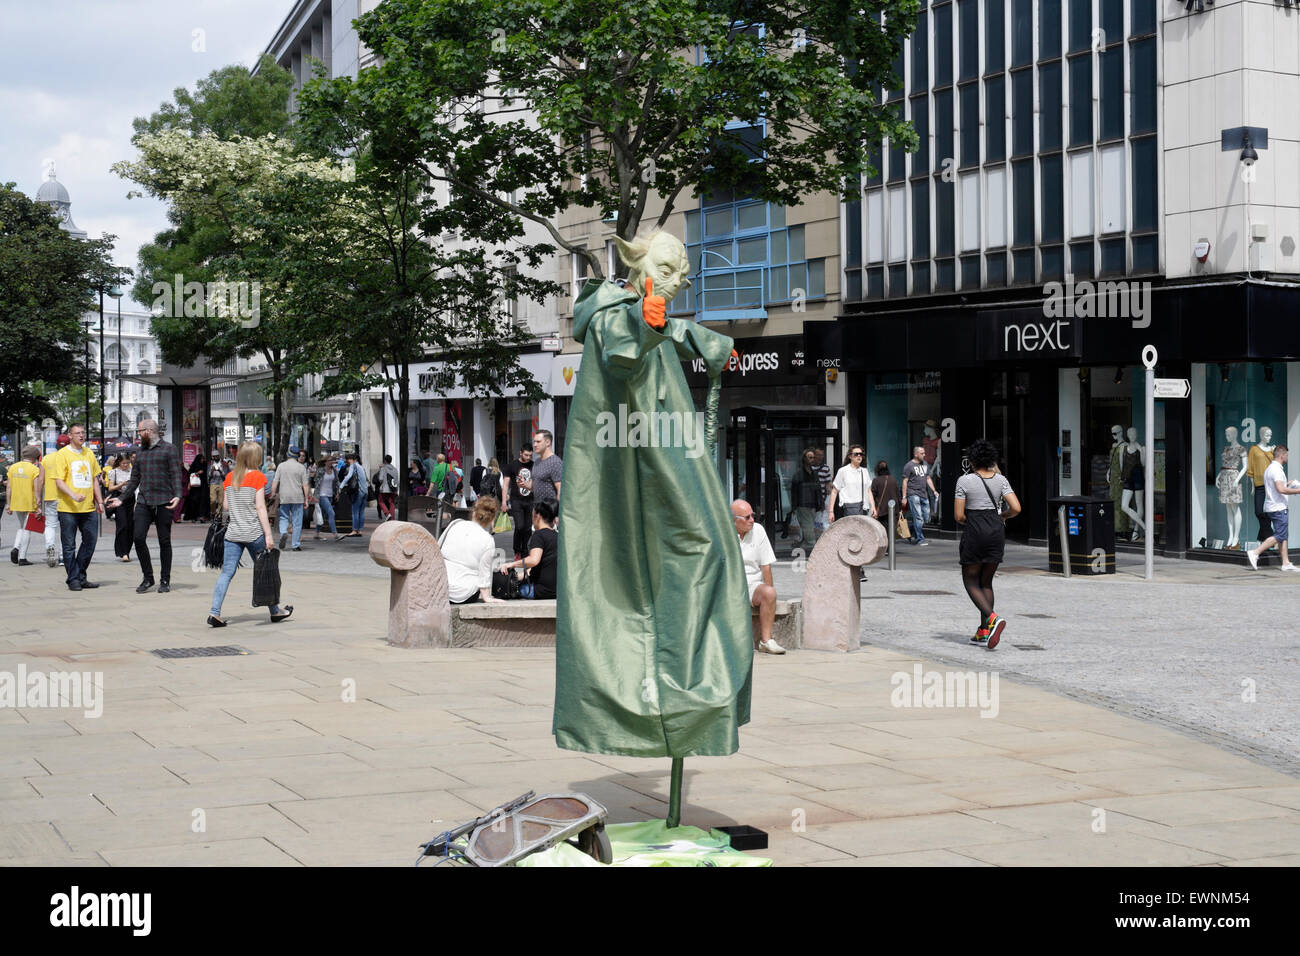 Street entertainers in Sheffield city centre England UK, unobserved levitation Stock Photo